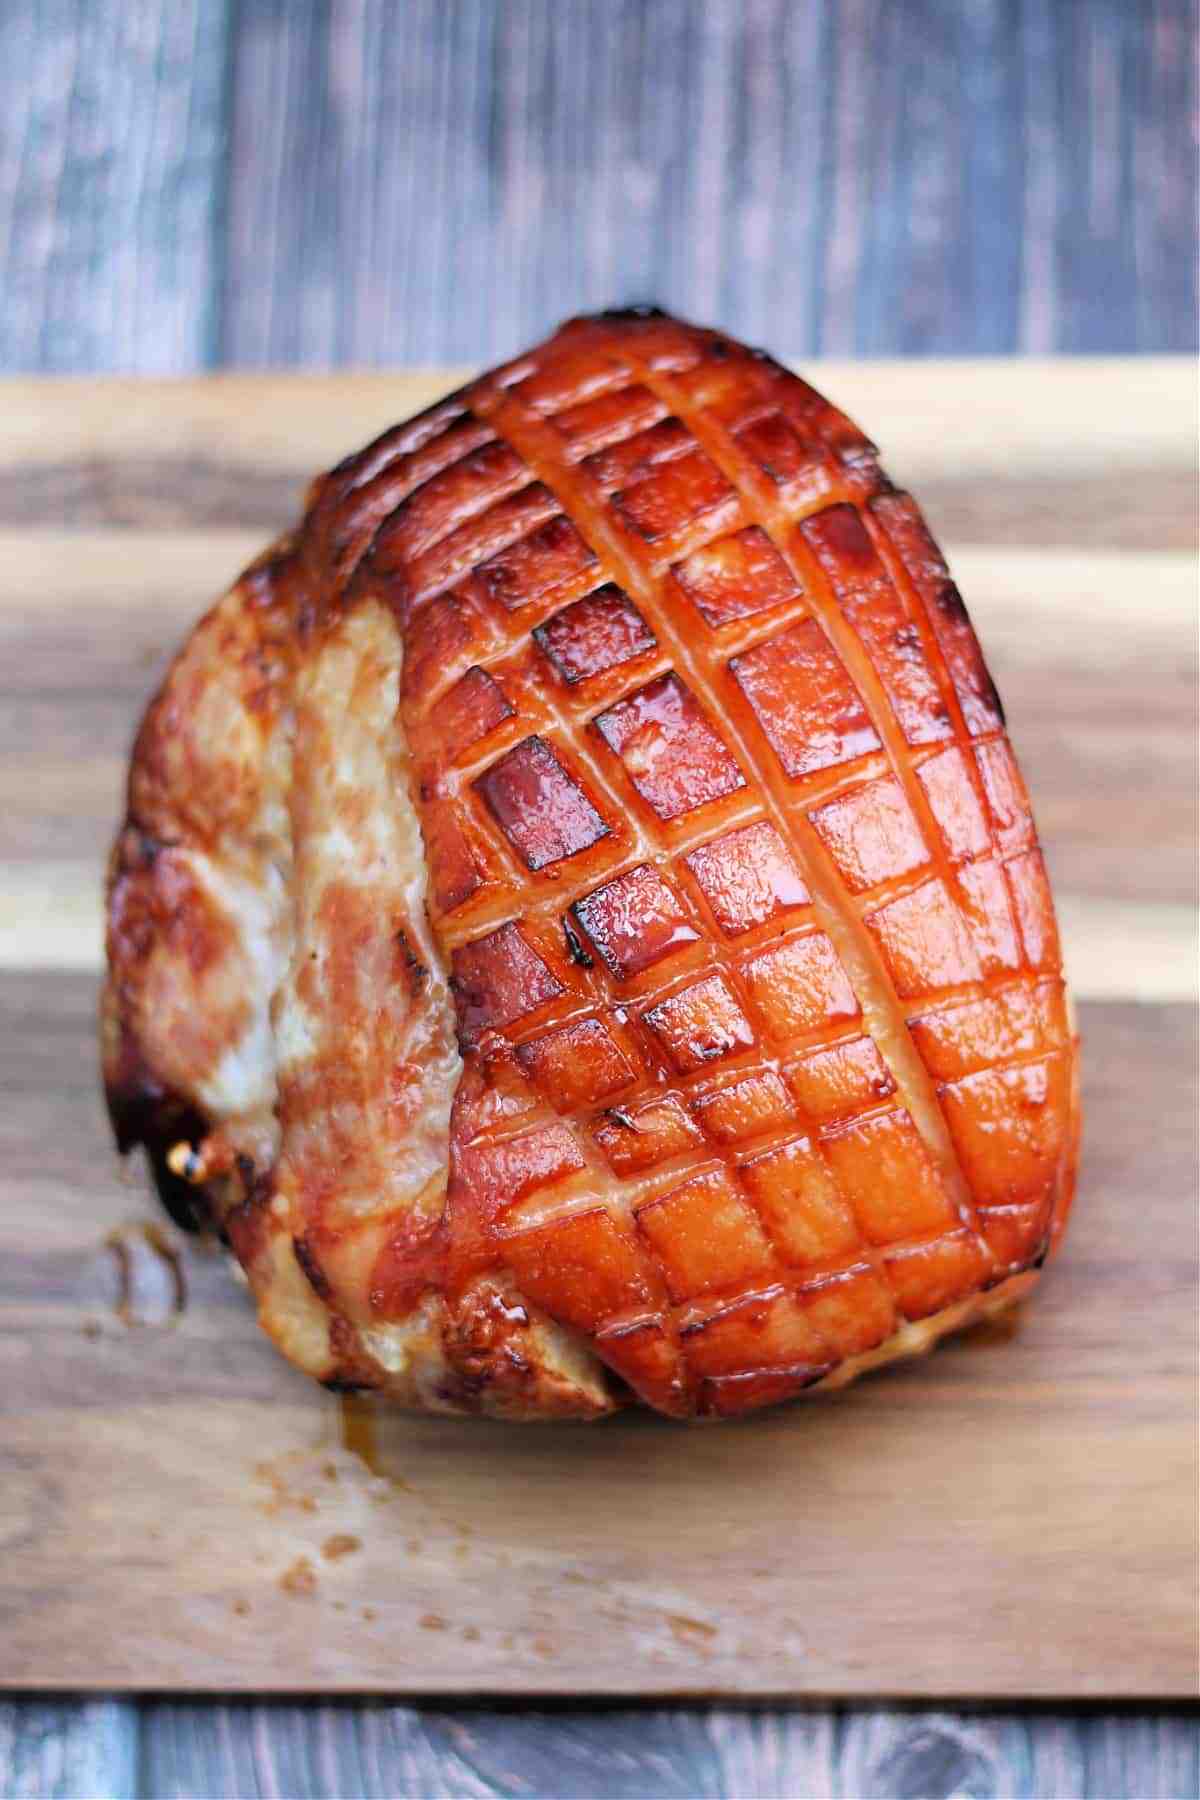 Is pork shoulder and ham the same thing?